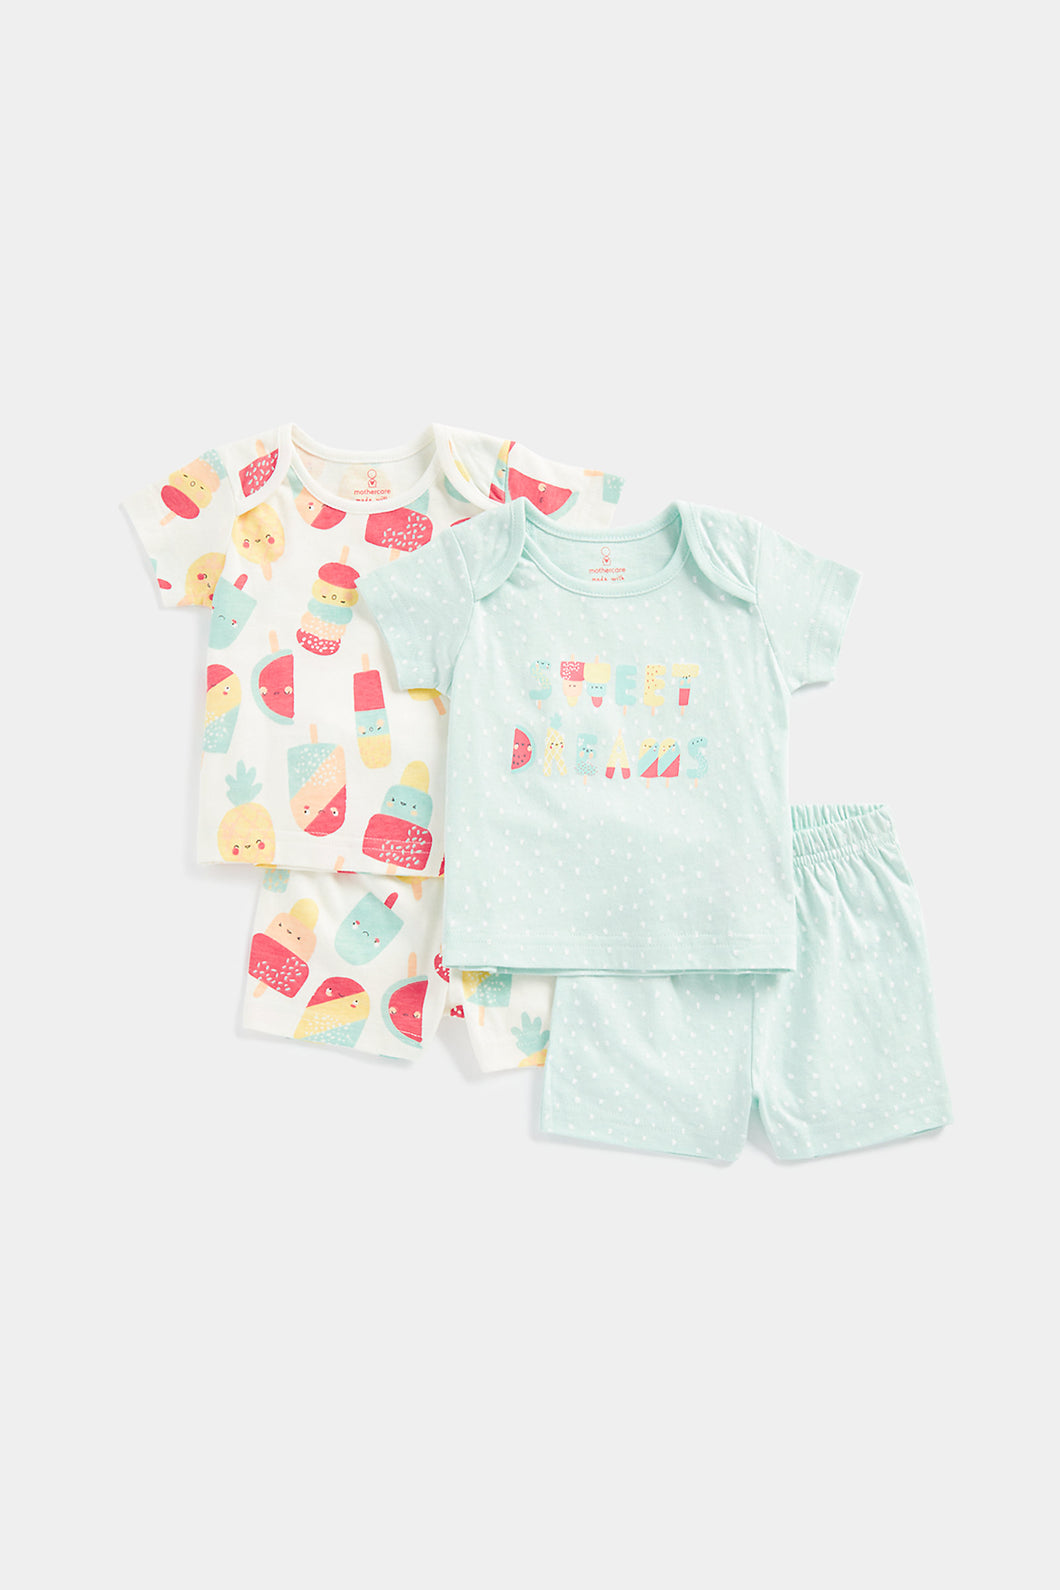 Mothercare Fruit Lolly Shortie Pyjamas - 2 Pack